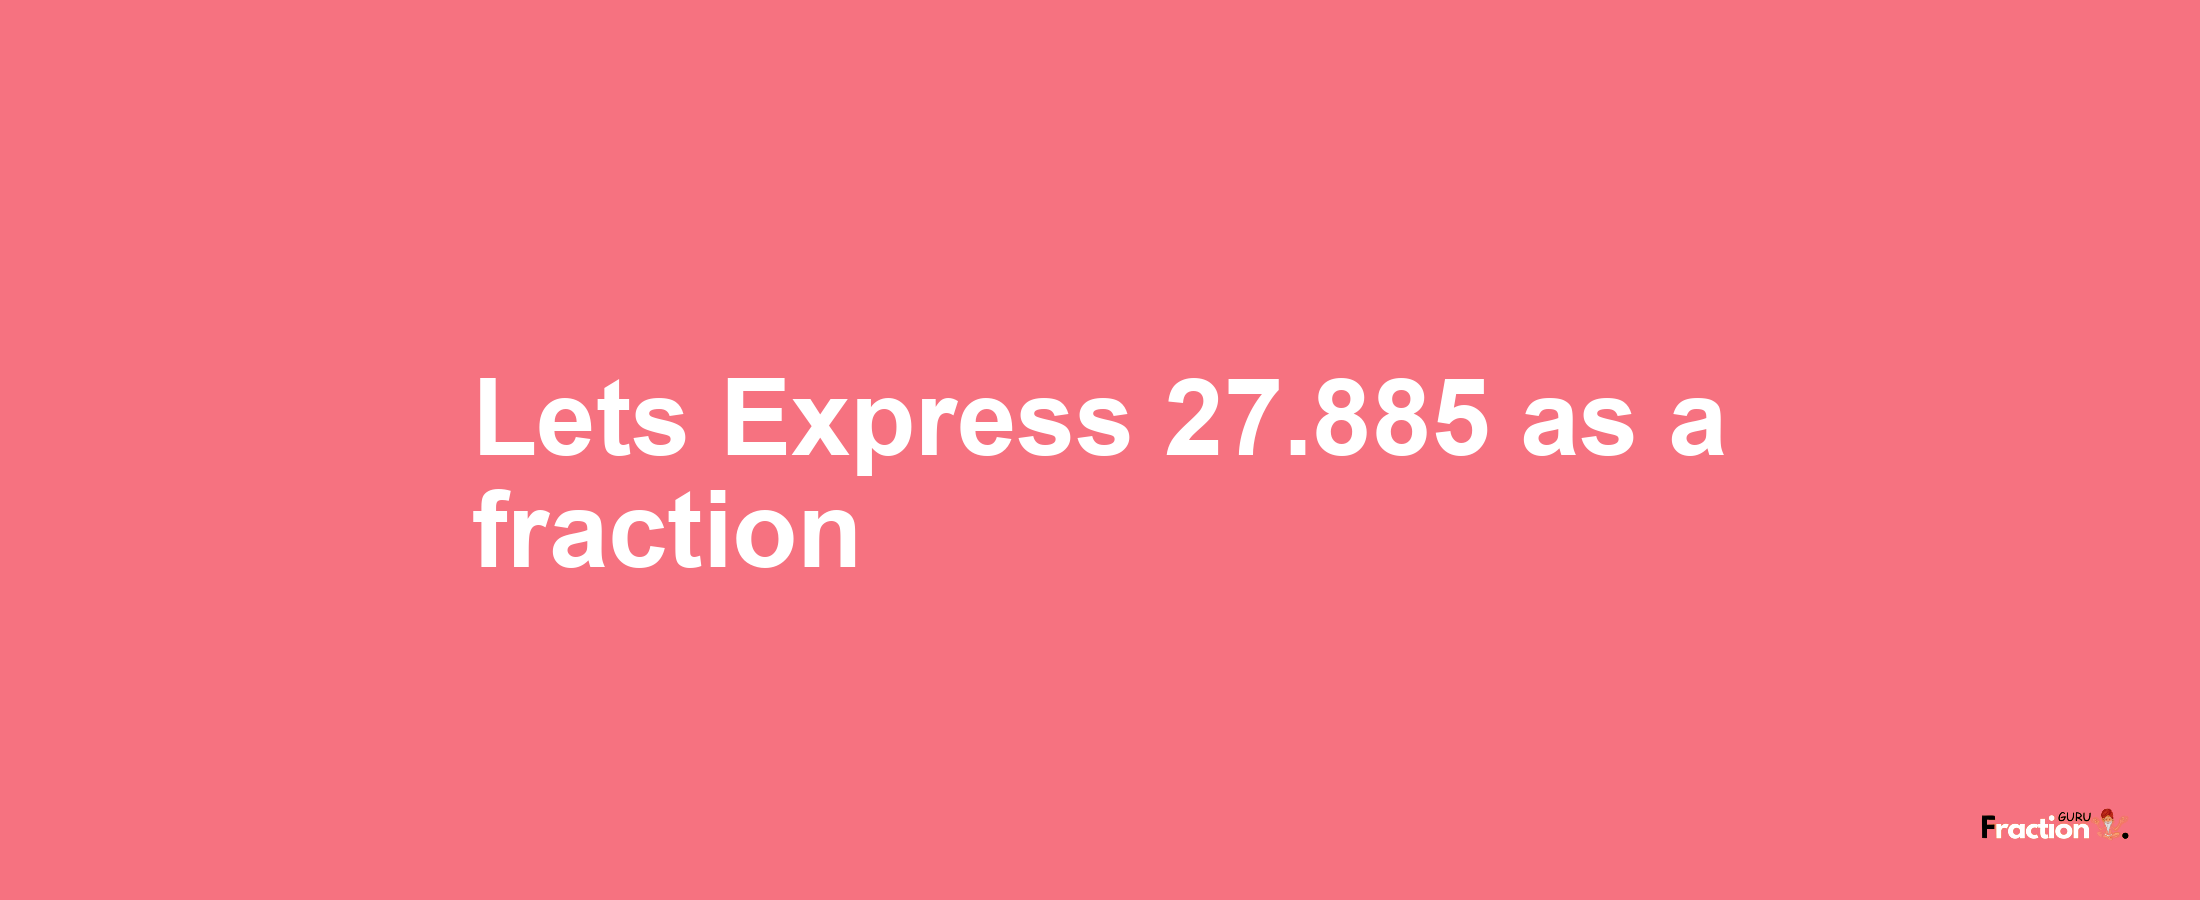 Lets Express 27.885 as afraction